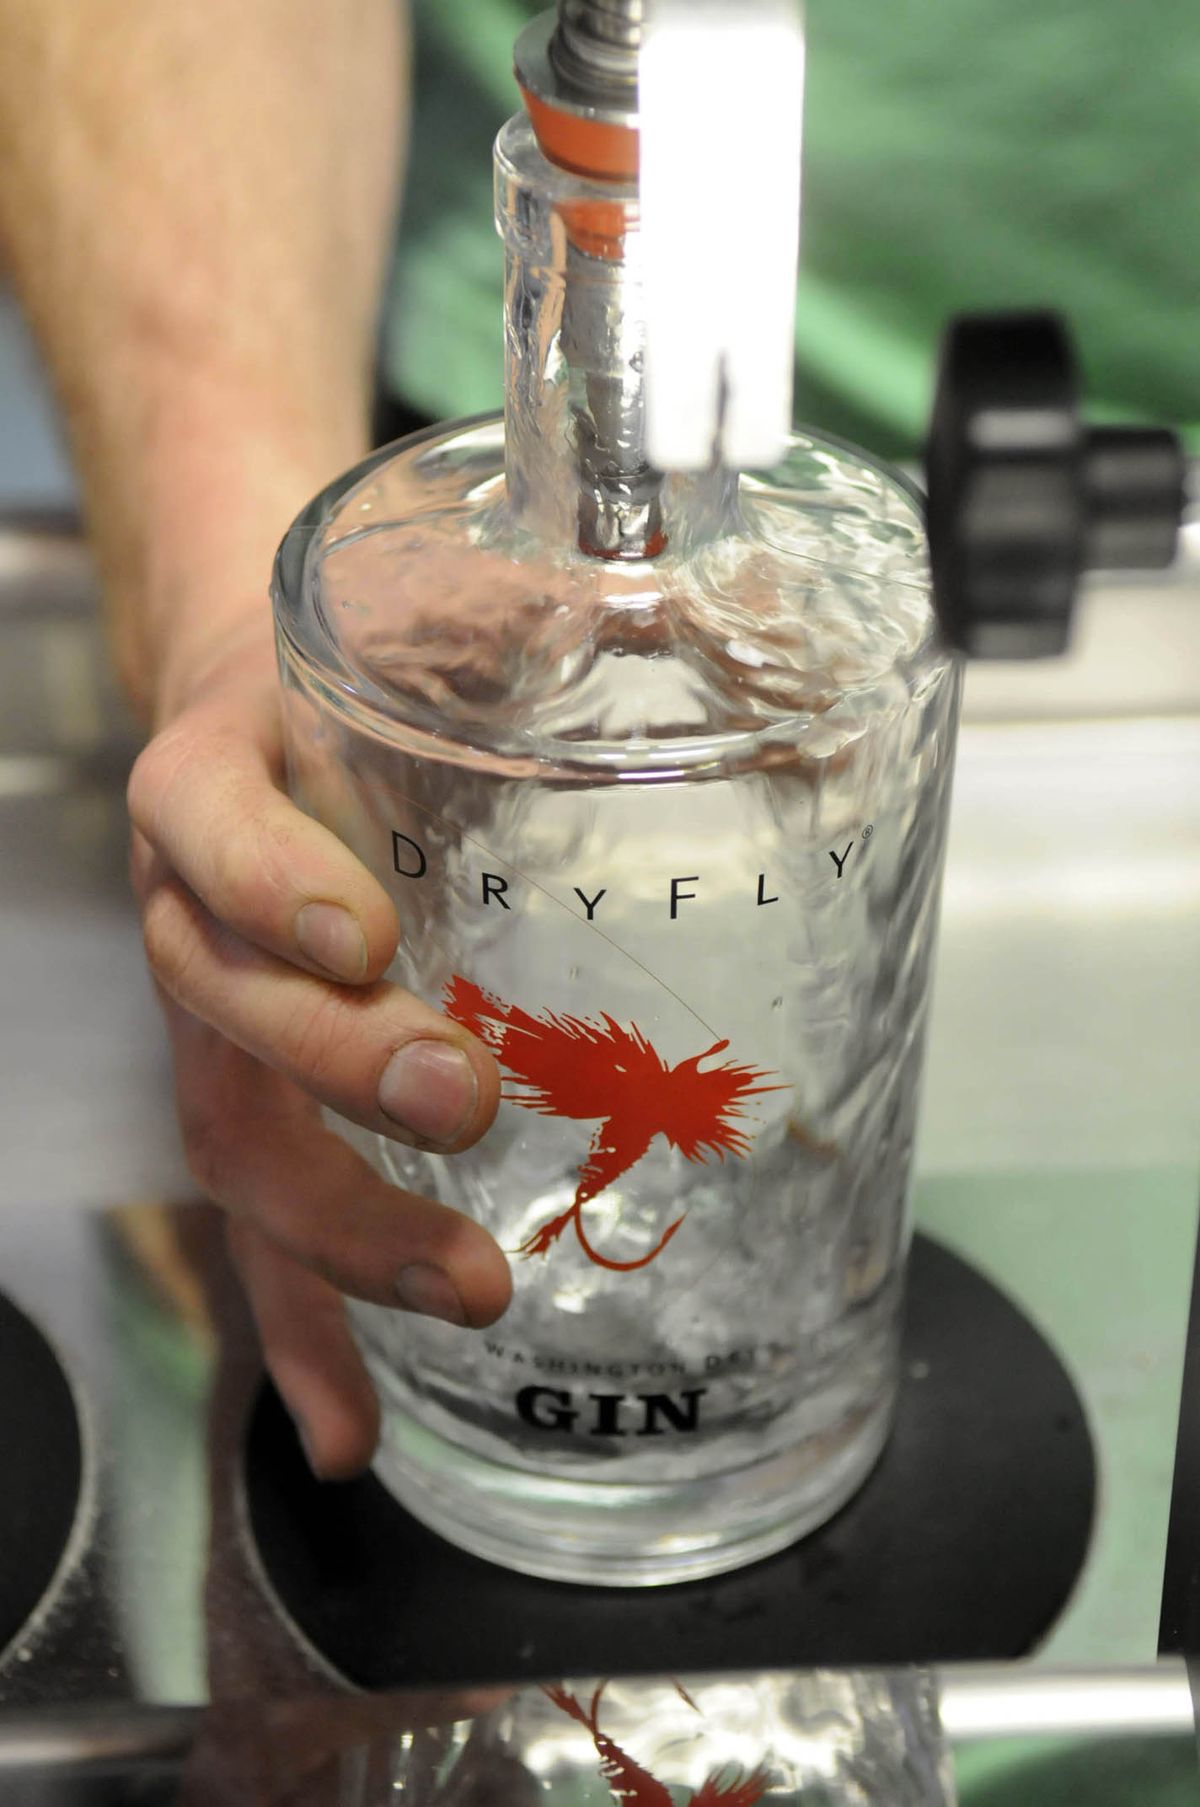 A volunteer places a clean bottle under a spout that fills it with gin Saturday, May 18, 2009, at Dry Fly Distillery in Spokane. The small-batch distiller uses groups of volunteers on Saturdays to bottle their products. (Jesse Tinsley / The Spokesman-Review)